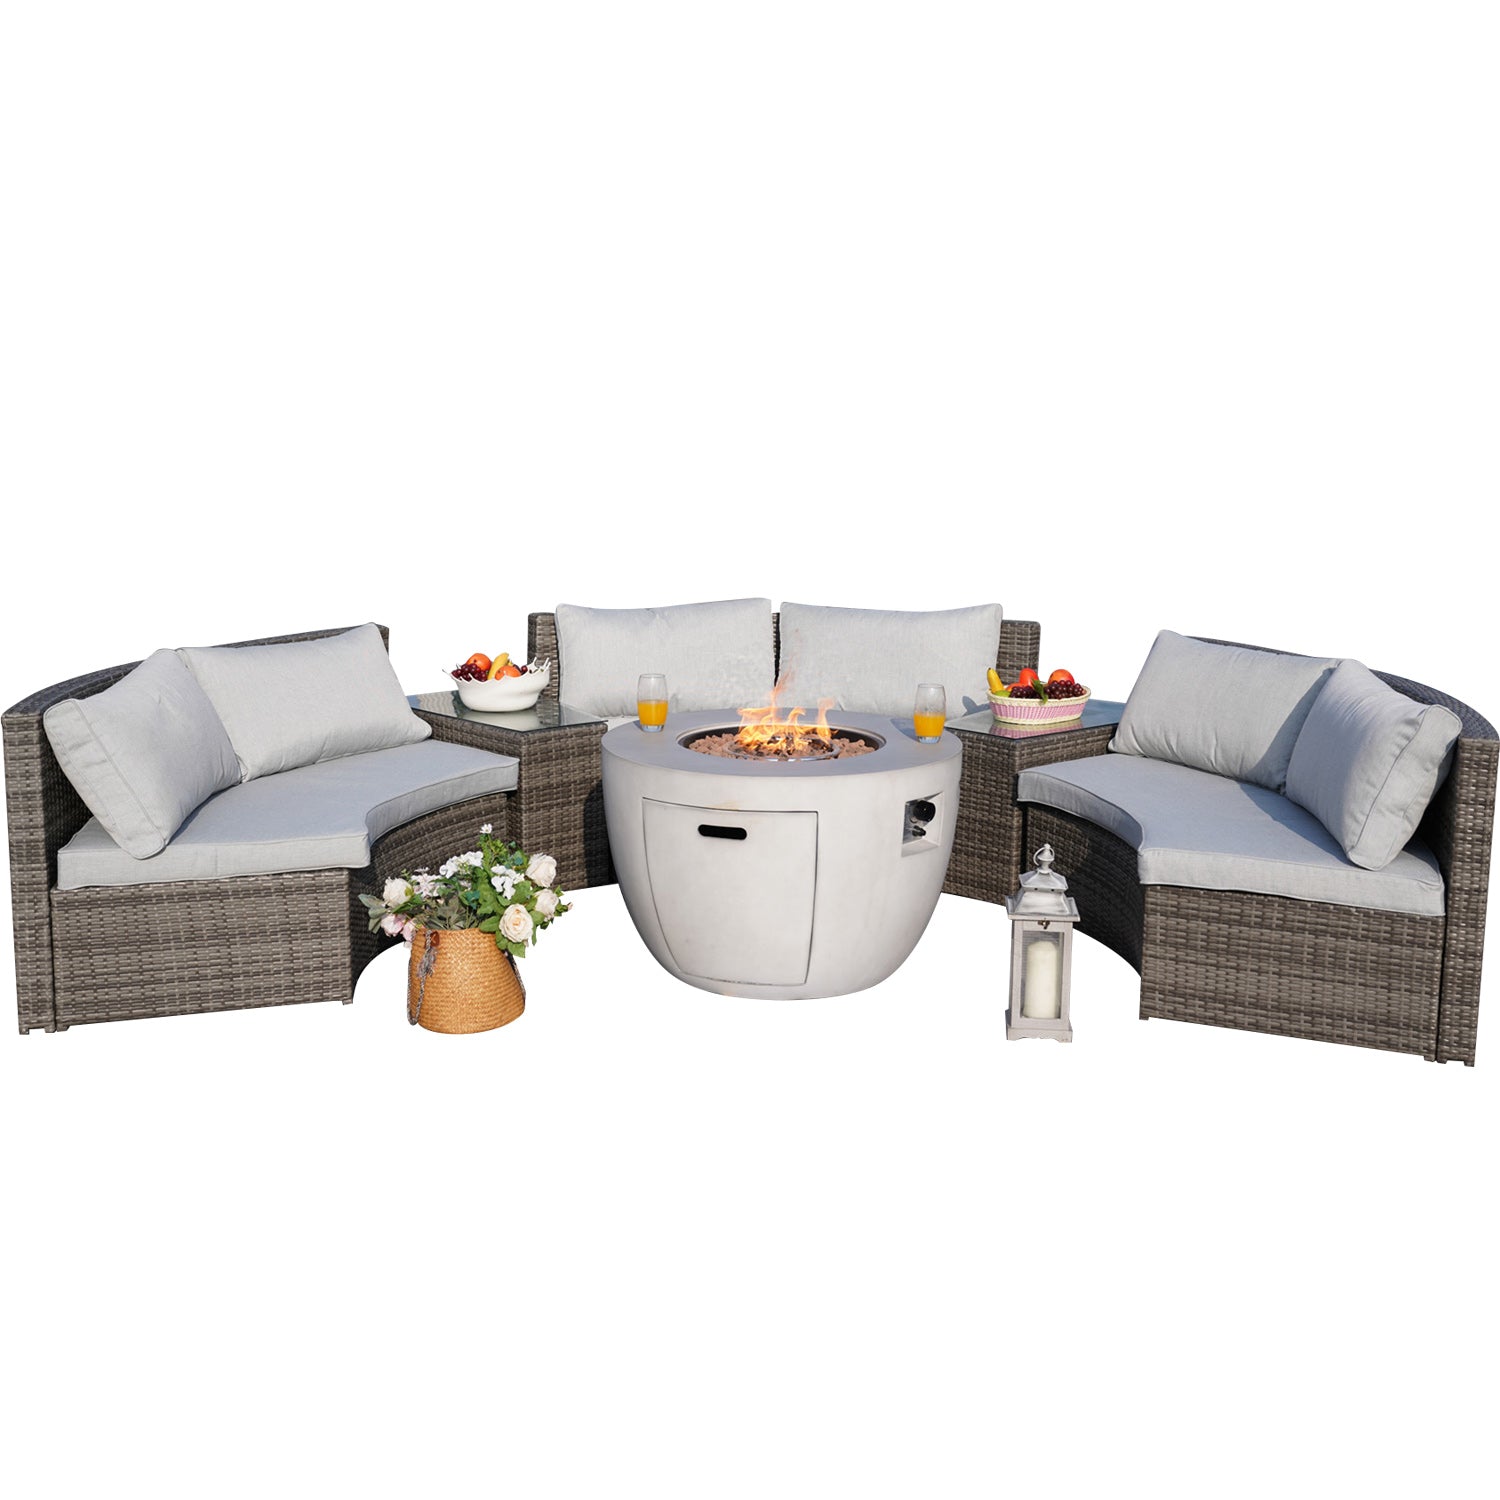 Abrihome Jessica 6 Piece Rattan Sectional Set with Fire Table and Cushions